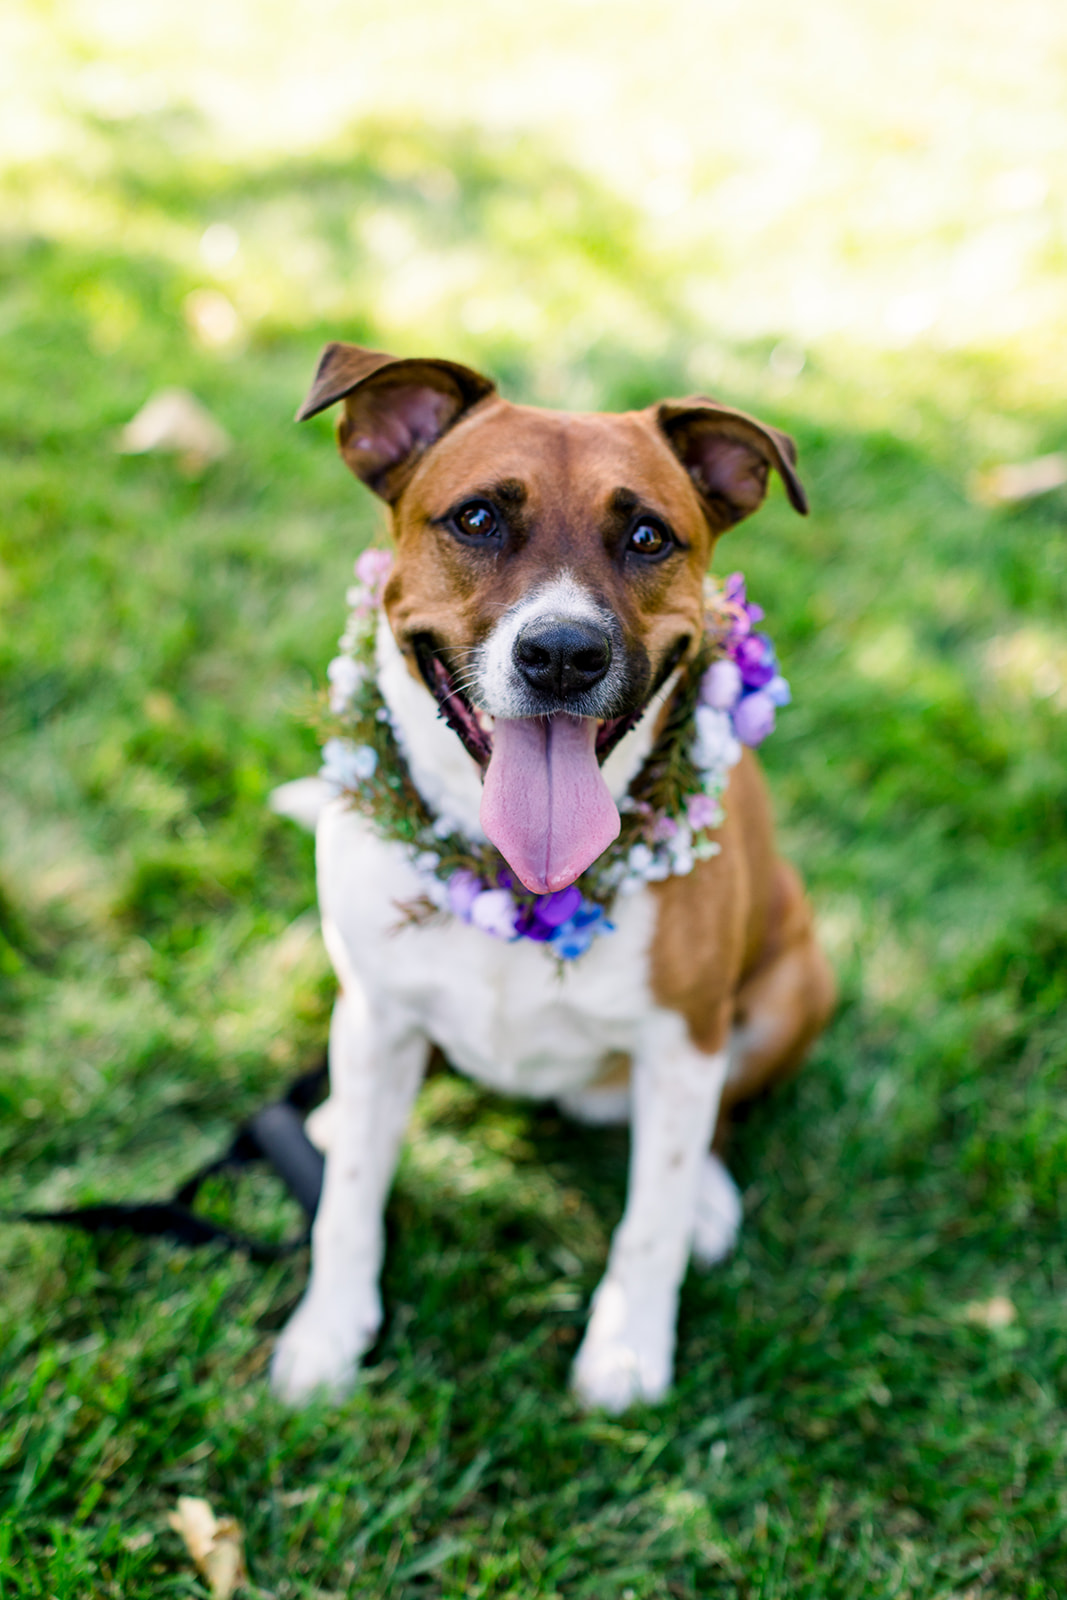 Adorable dog Brandi, adorned with a flower crown, joins the couple in a heartwarming ceremony moment